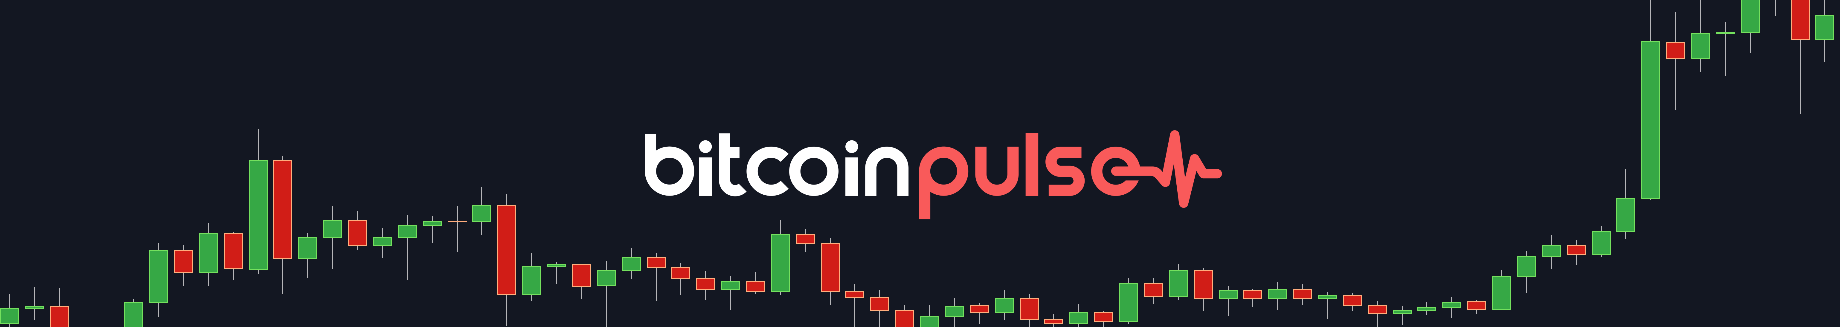 2020 Parallels - Bitcoin Pulse #117